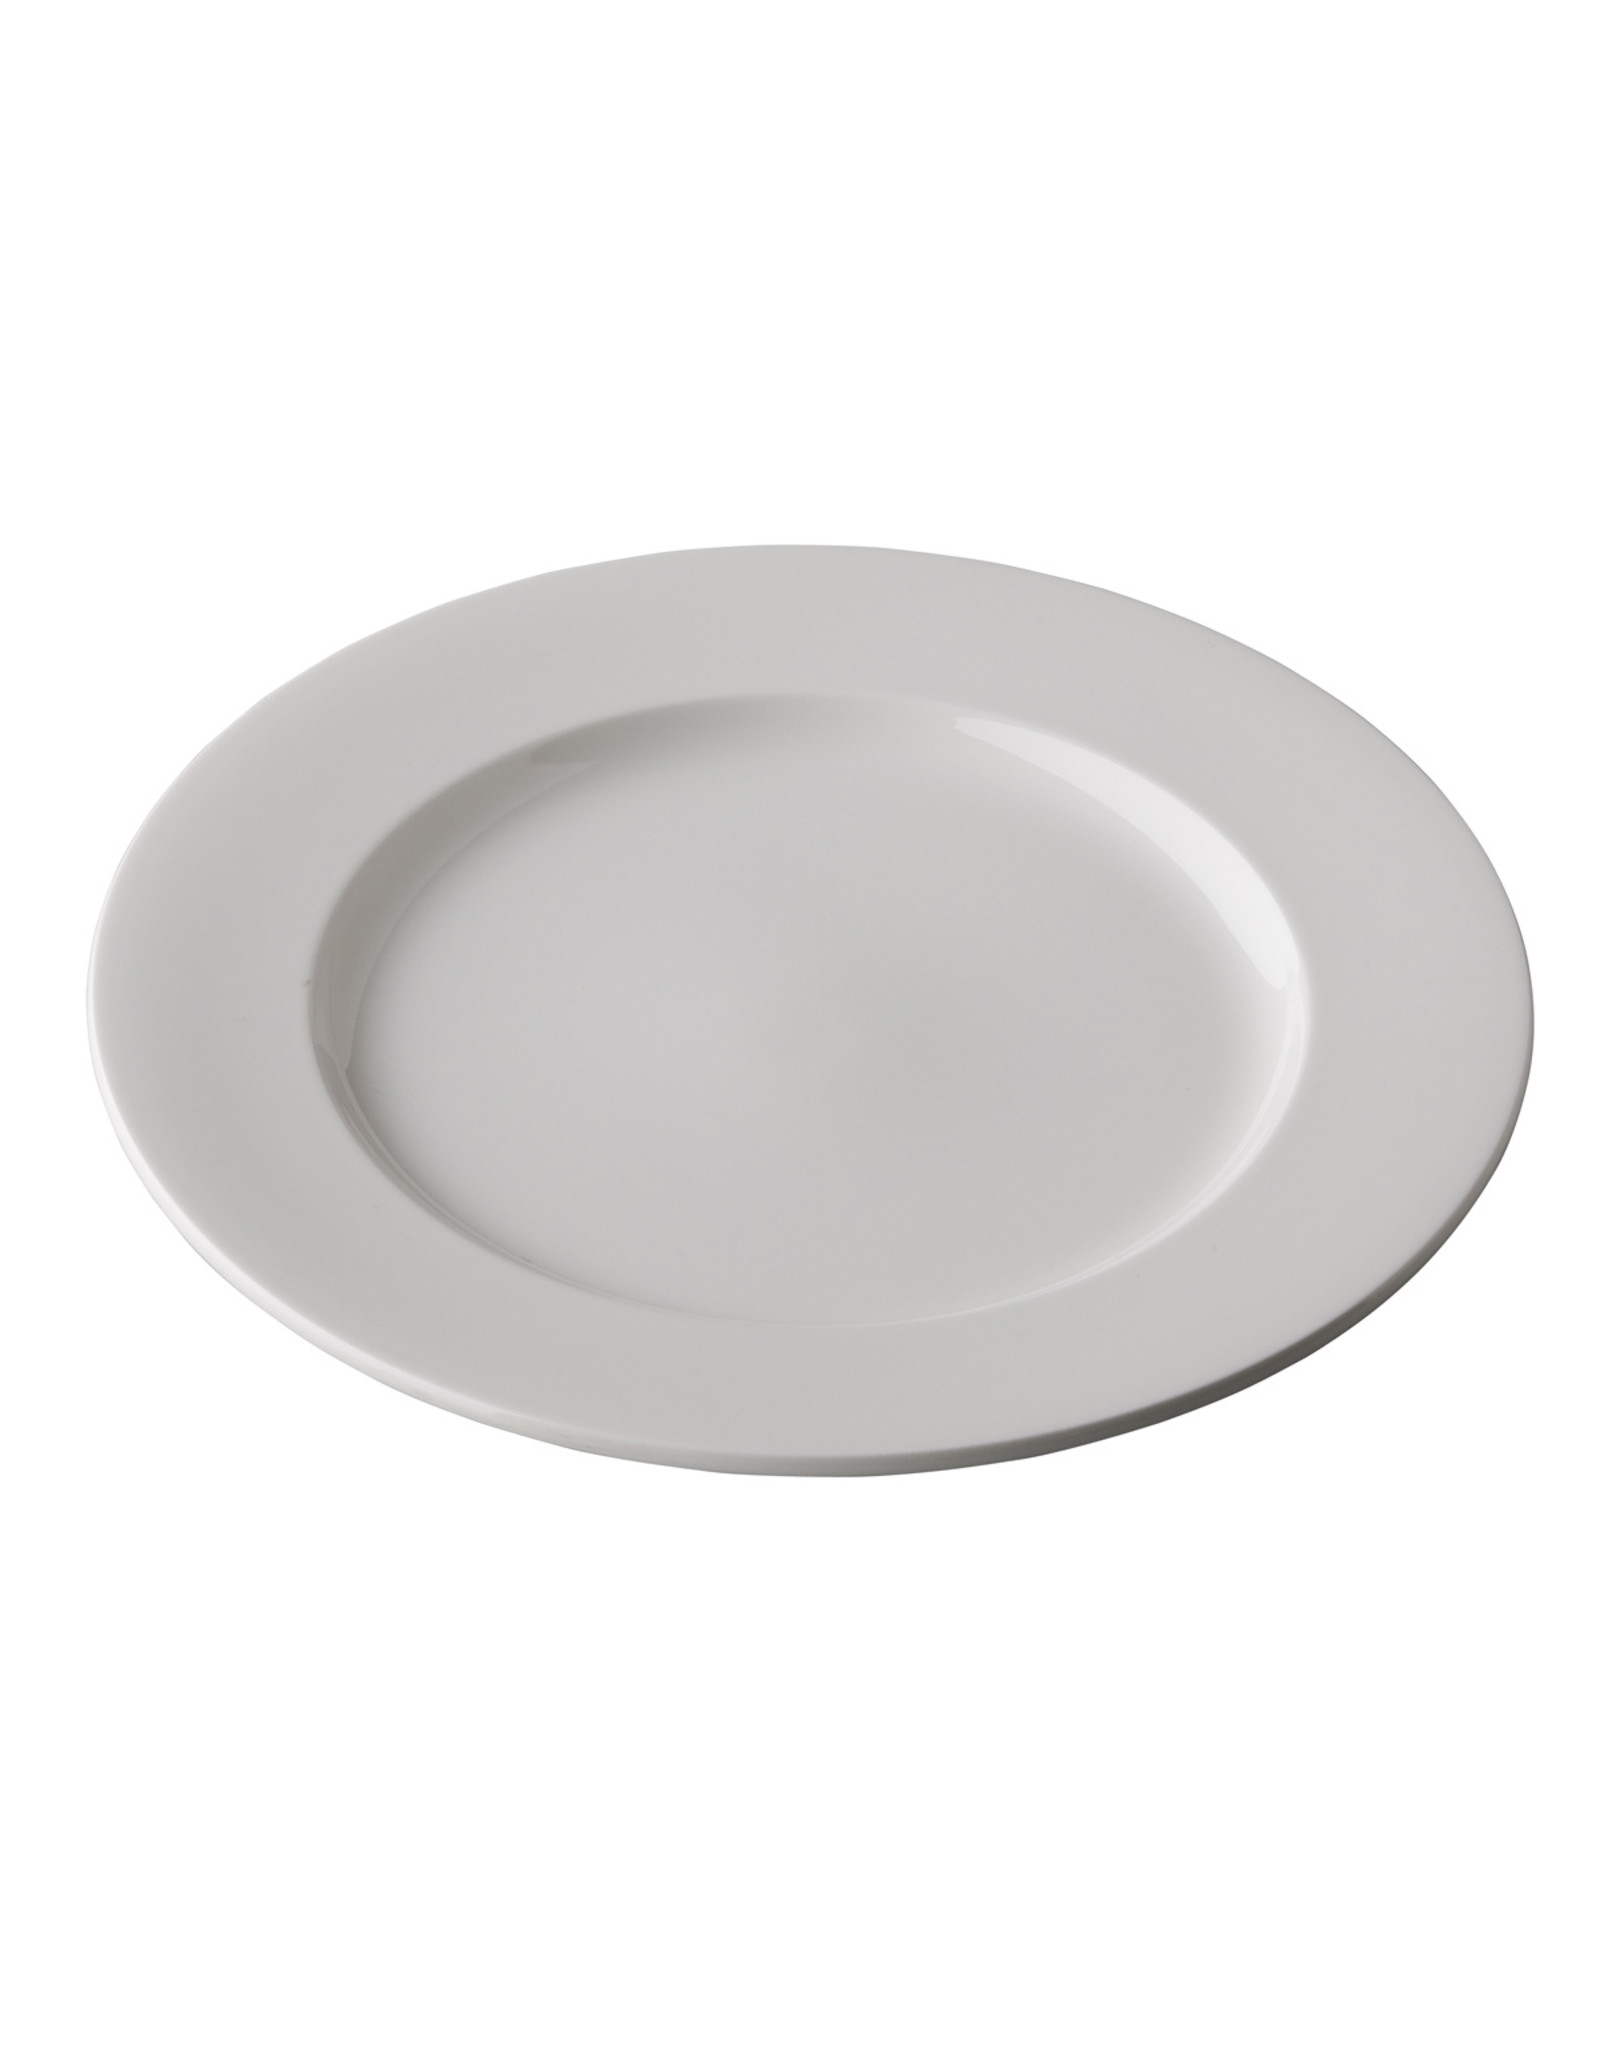 Stylepoint Q Fine China rimmed plate 24,4 cm